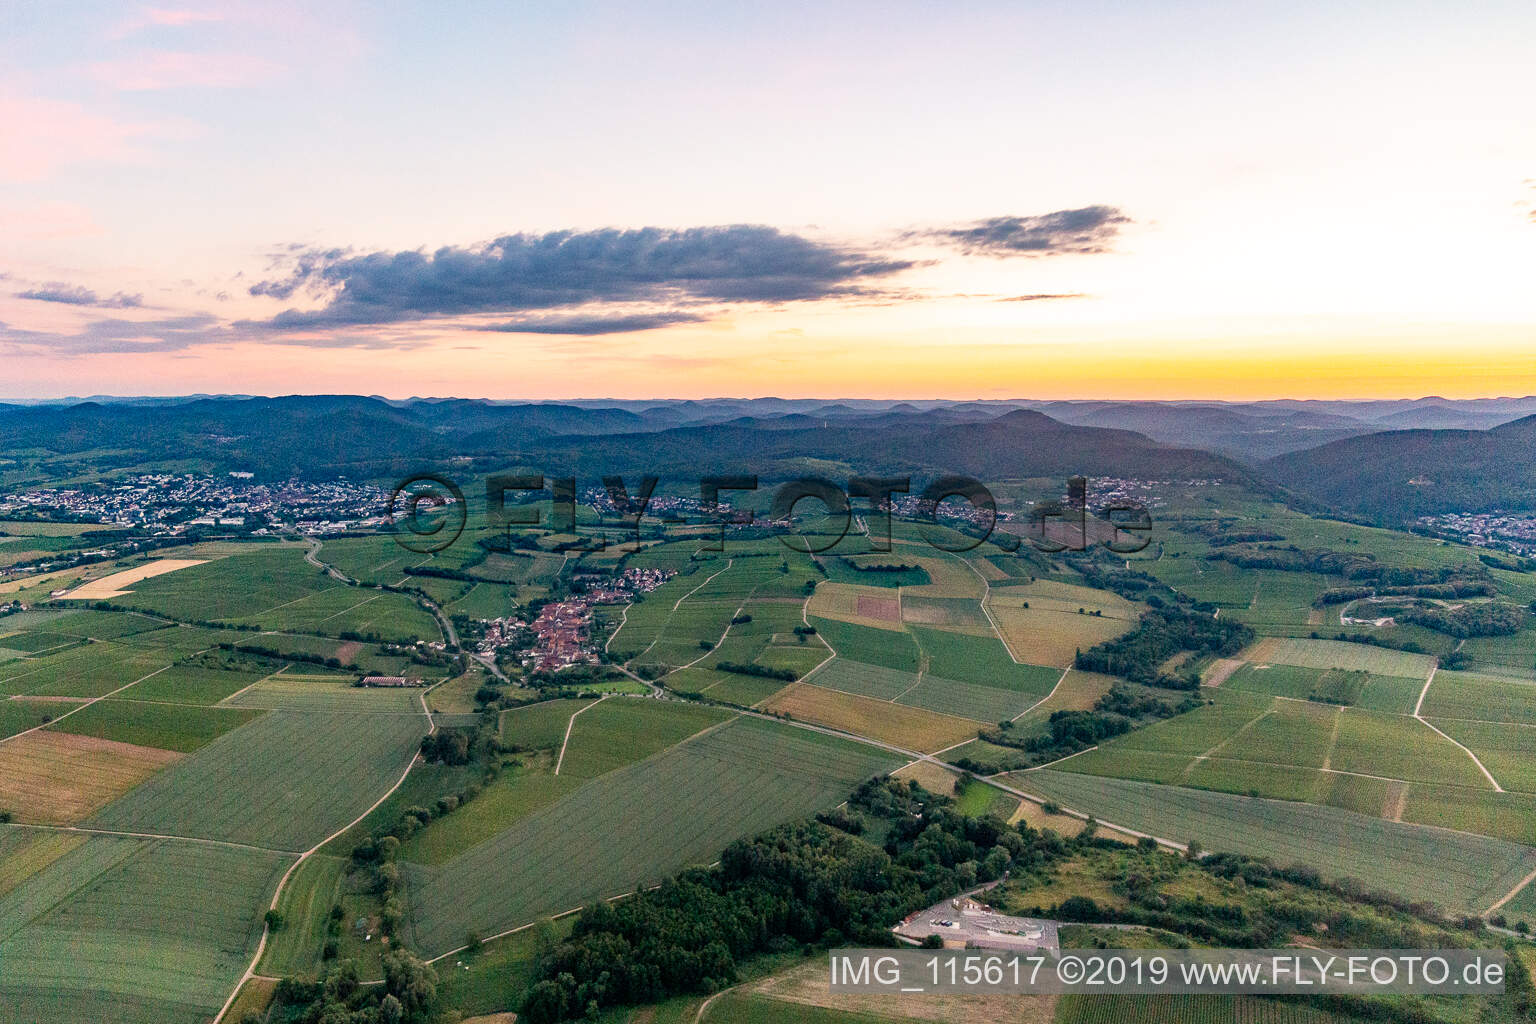 Niederhorbach in the state Rhineland-Palatinate, Germany seen from a drone